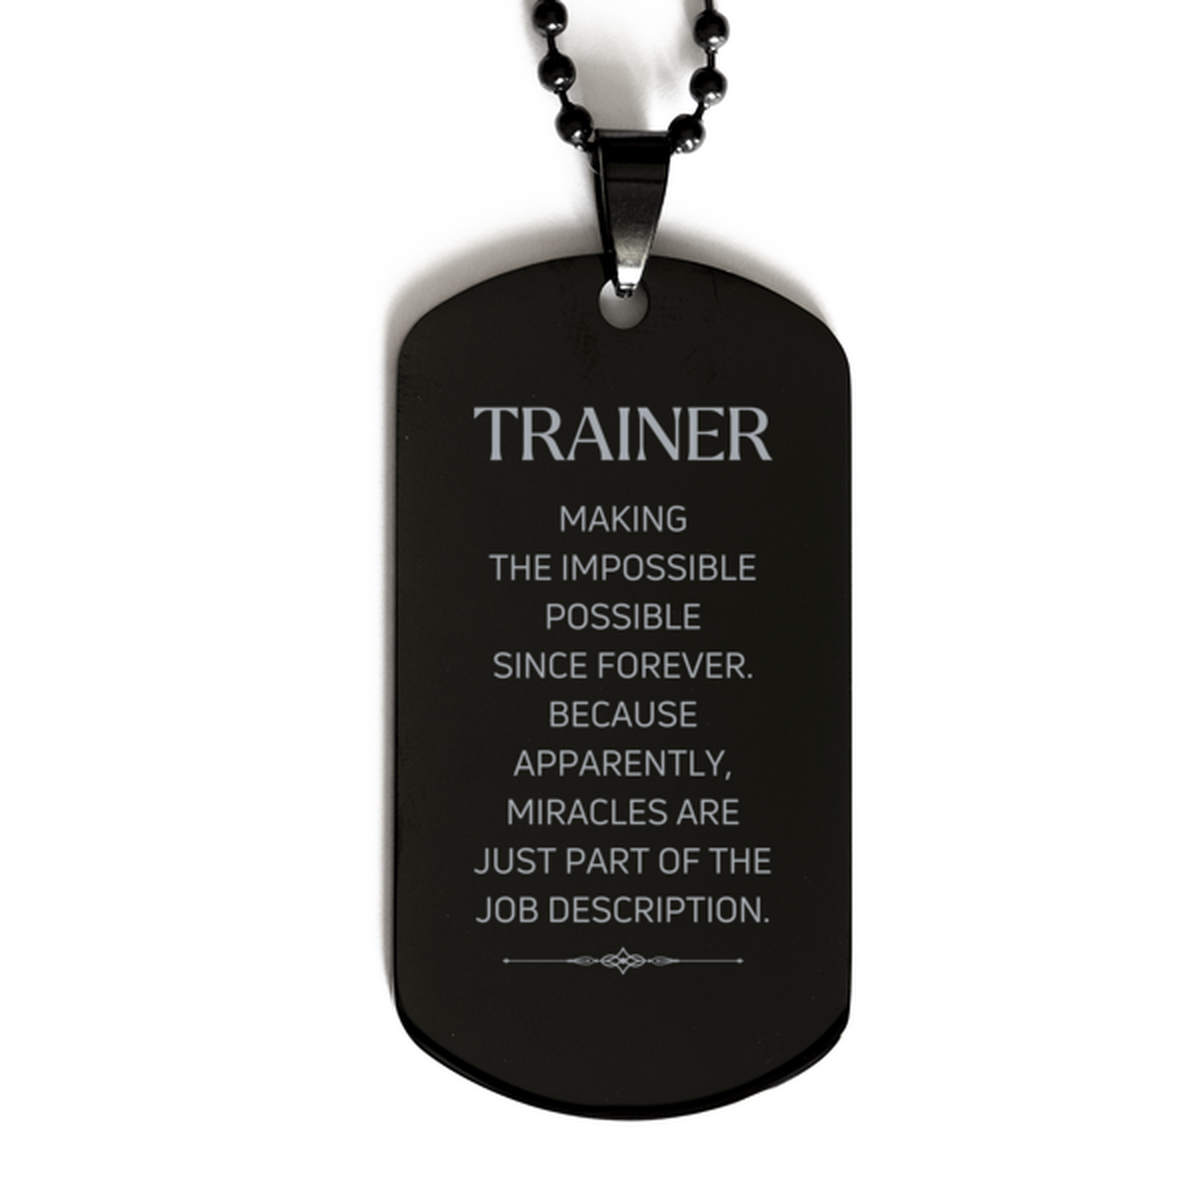 Funny Trainer Gifts, Miracles are just part of the job description, Inspirational Birthday Black Dog Tag For Trainer, Men, Women, Coworkers, Friends, Boss